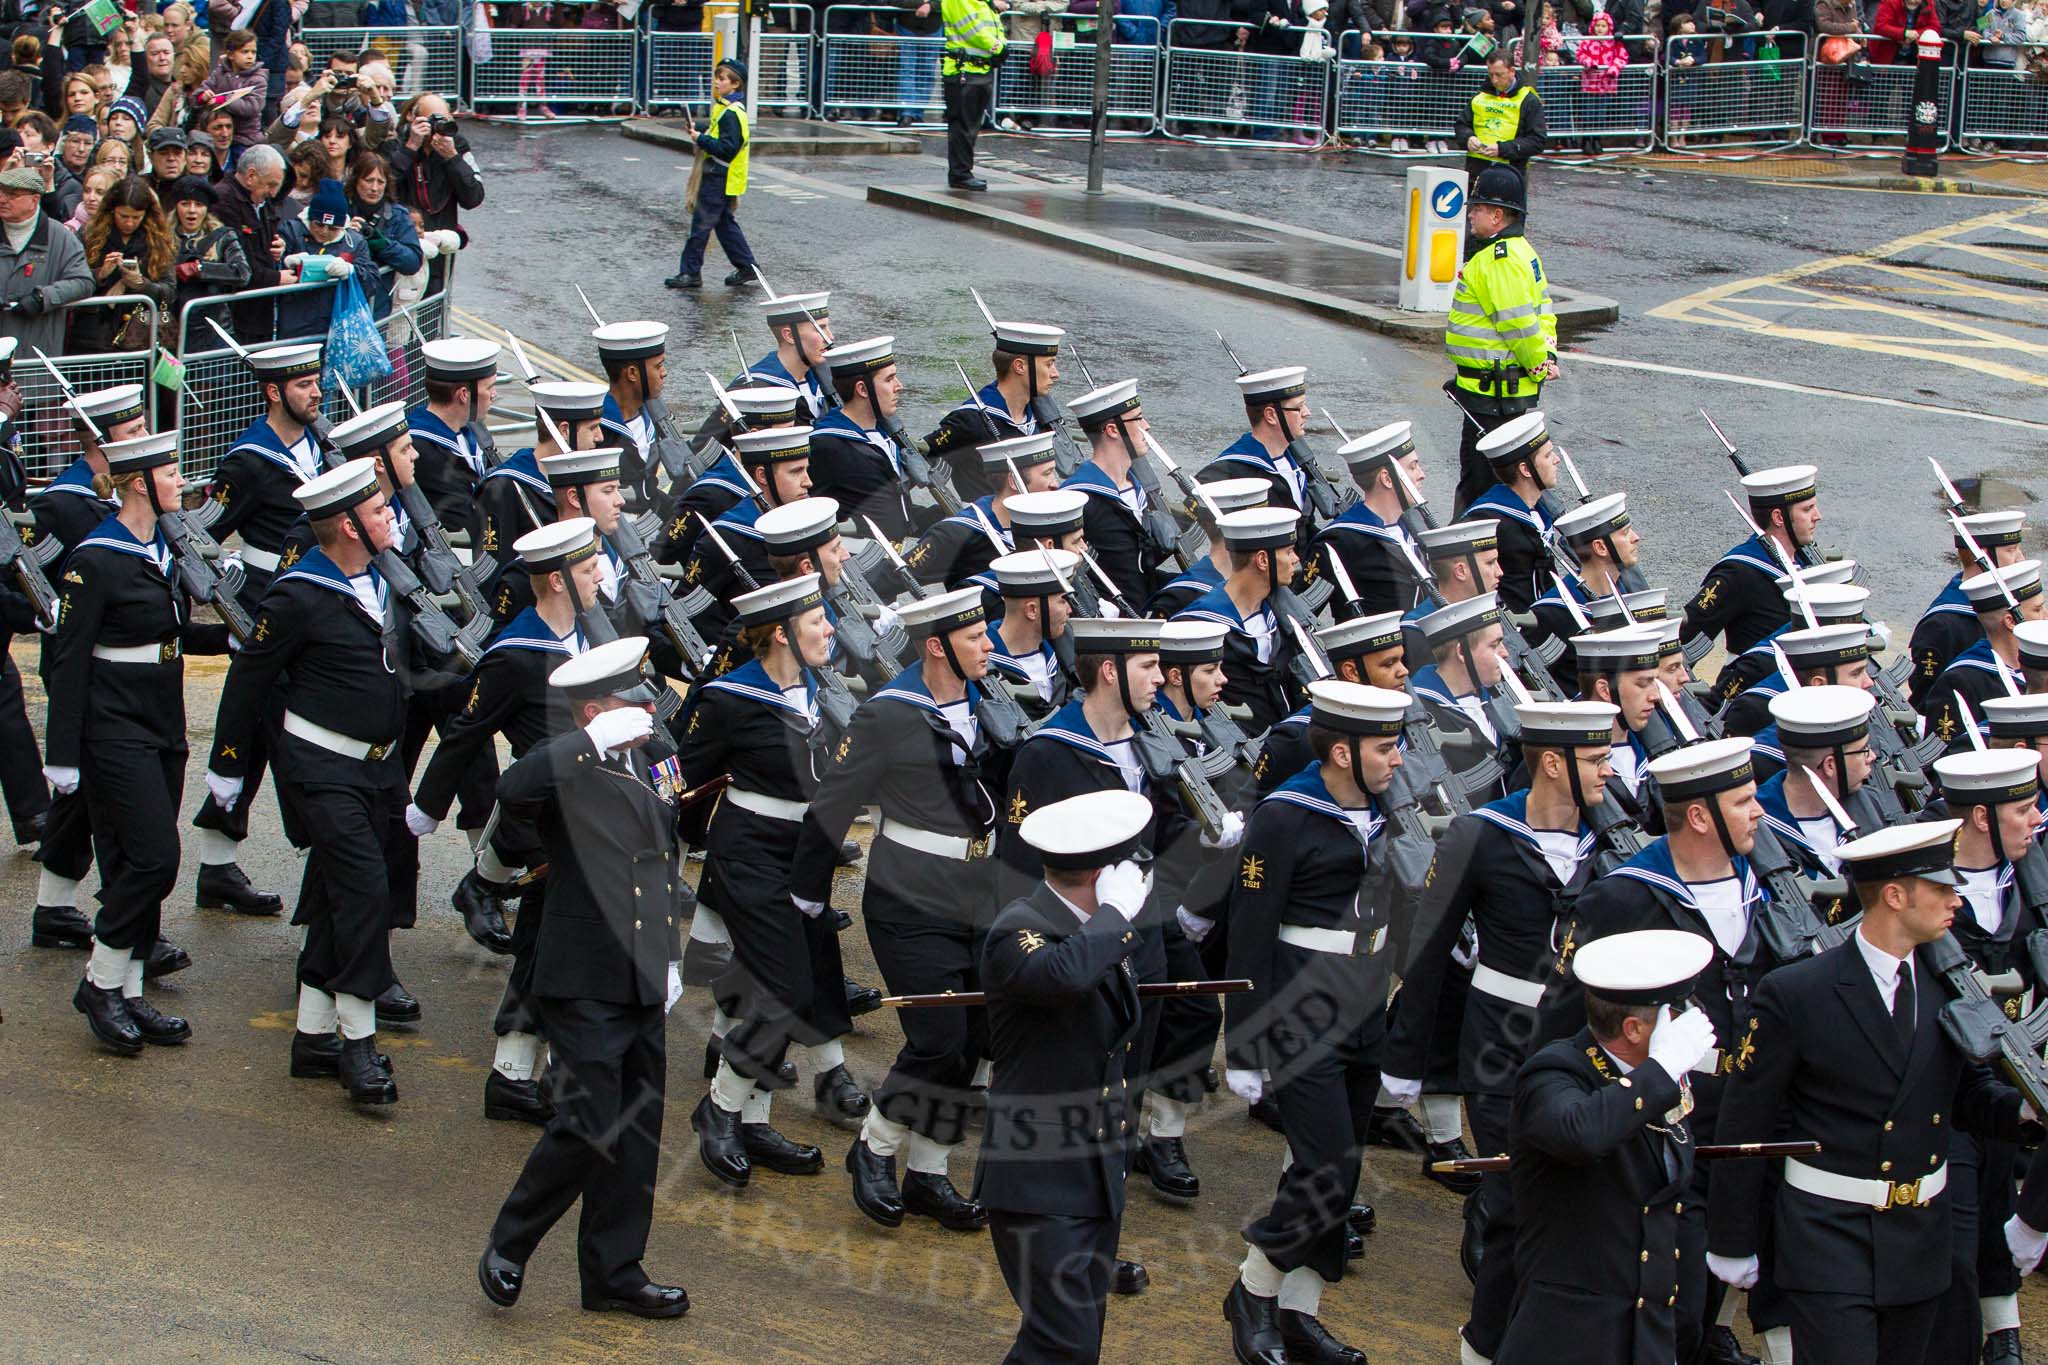 Lord Mayor's Show 2012: Entry 87 - Royal Navy (HMS Collingwood)..
Press stand opposite Mansion House, City of London,
London,
Greater London,
United Kingdom,
on 10 November 2012 at 11:38, image #1152